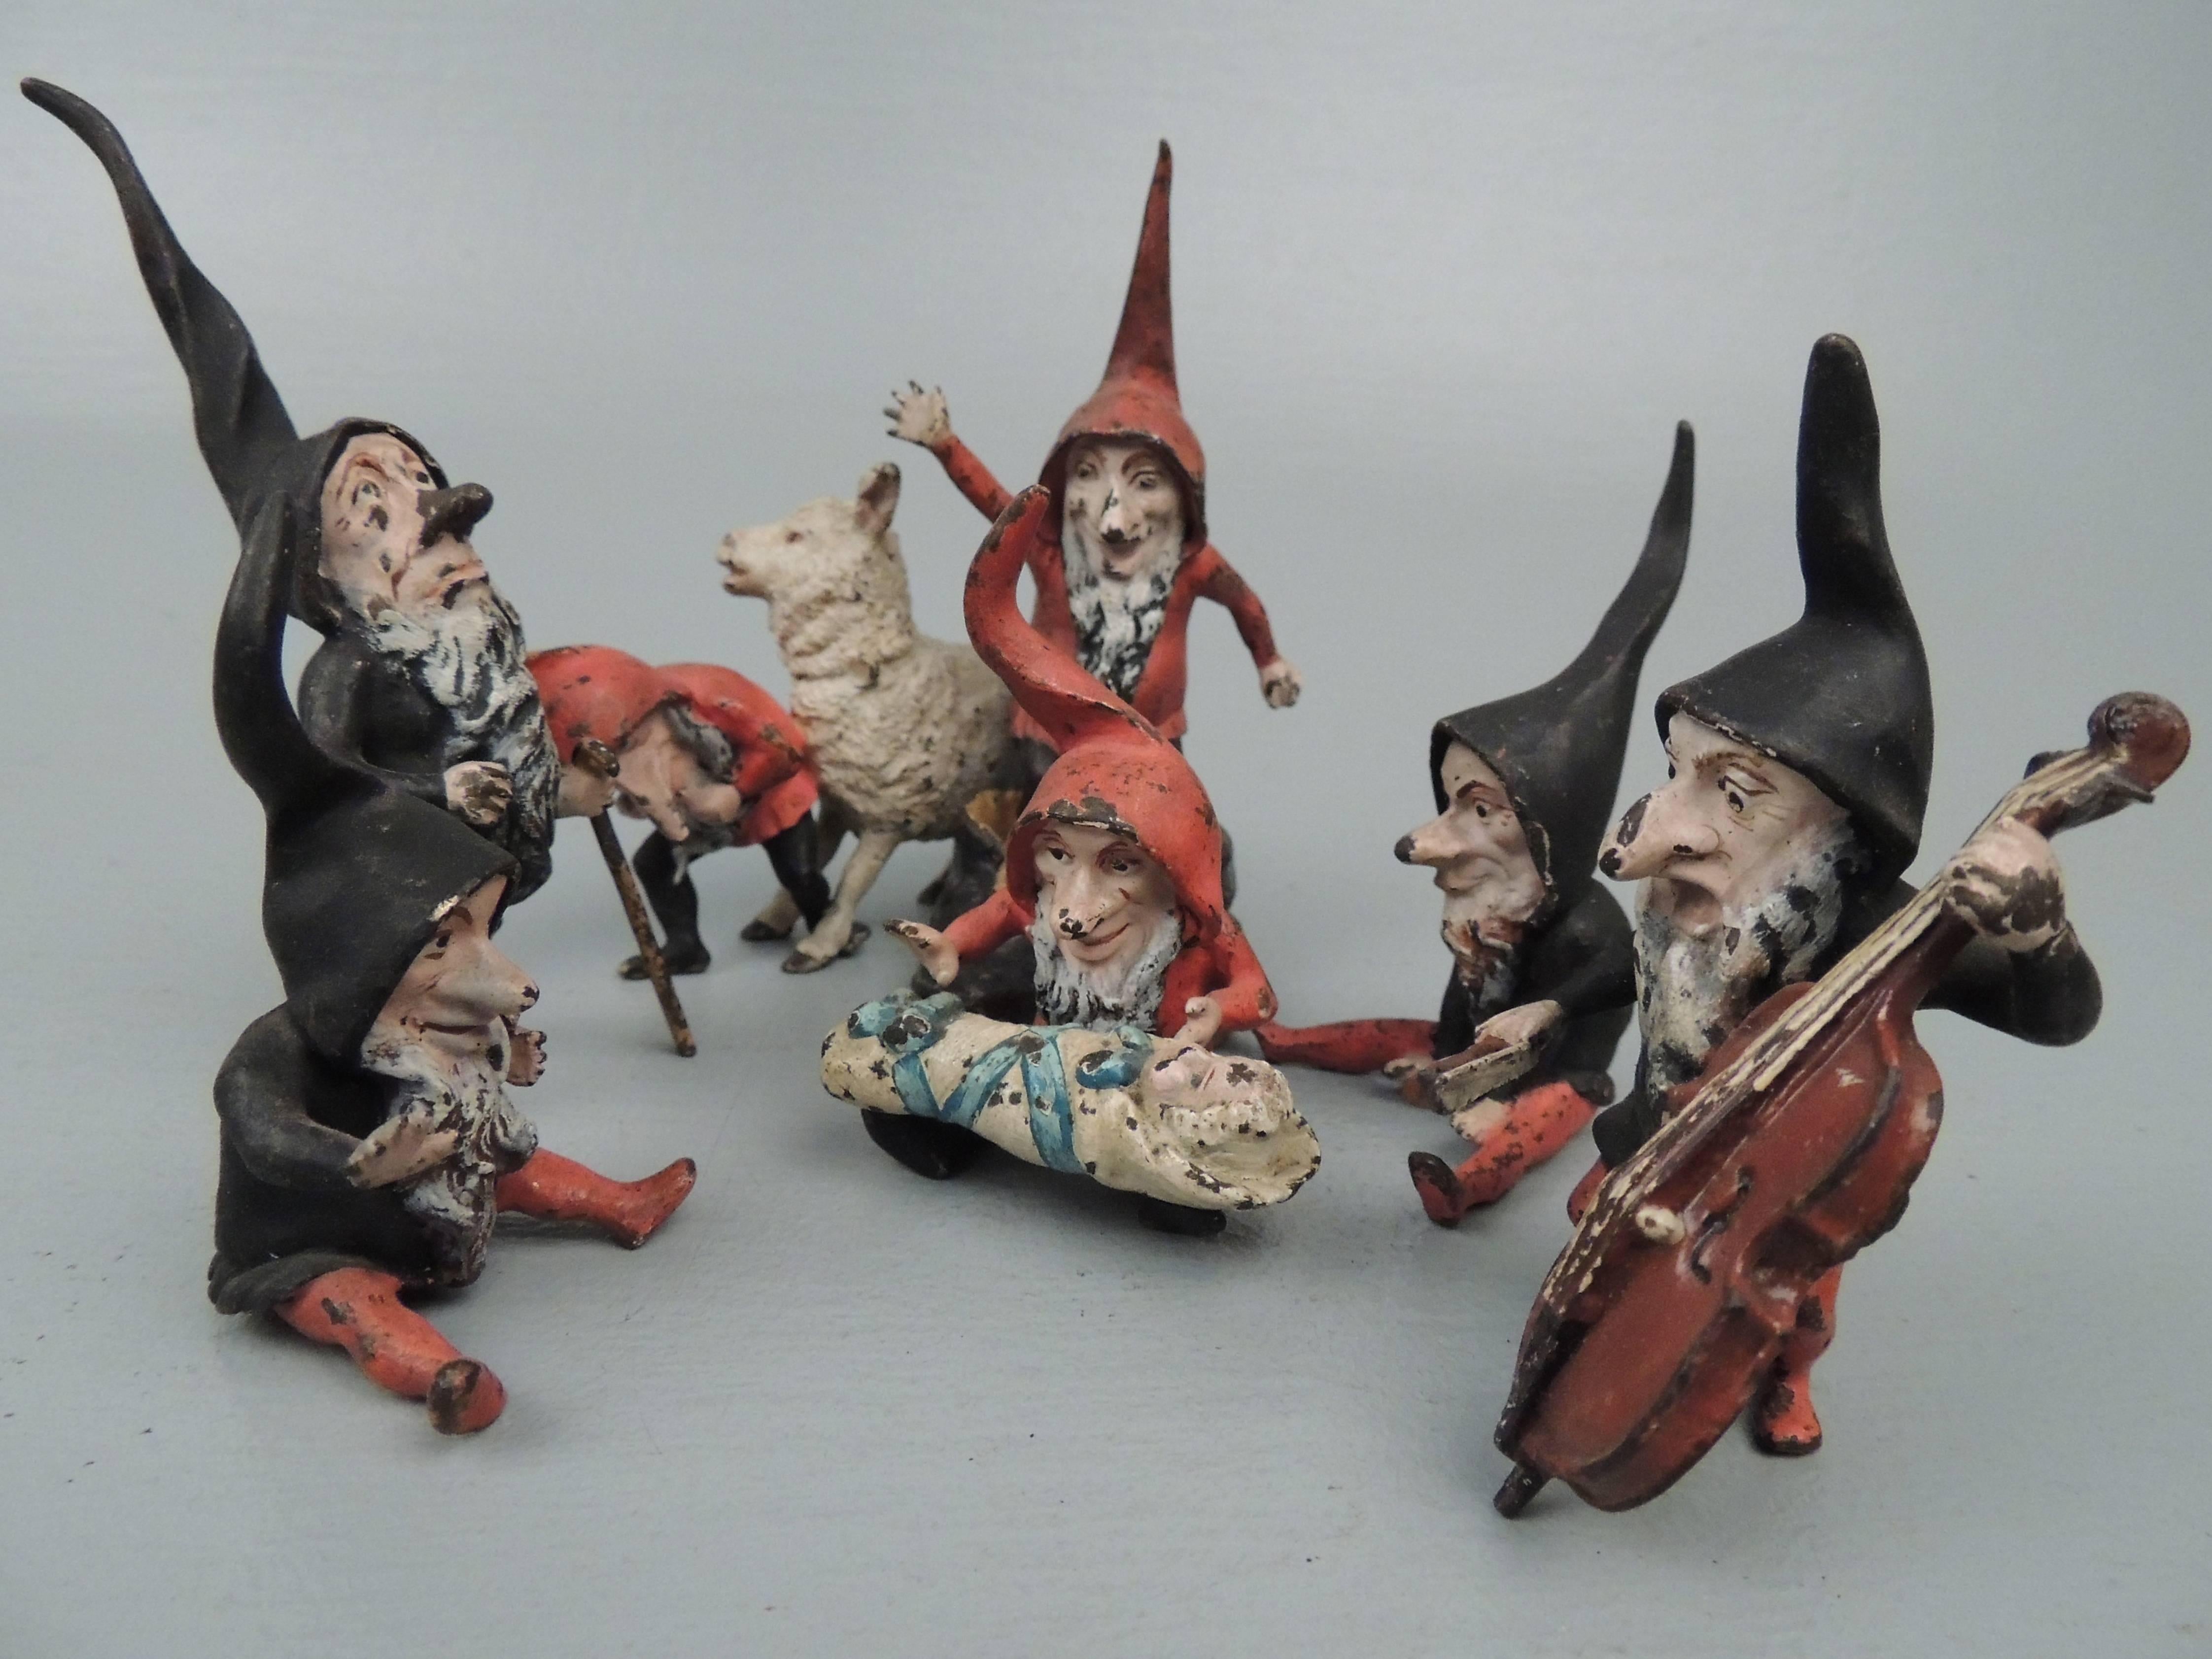 A rare, antique set of Snow White and the Seven Dwarves cold-painted Vienna or Austrian bronzes. 

This 